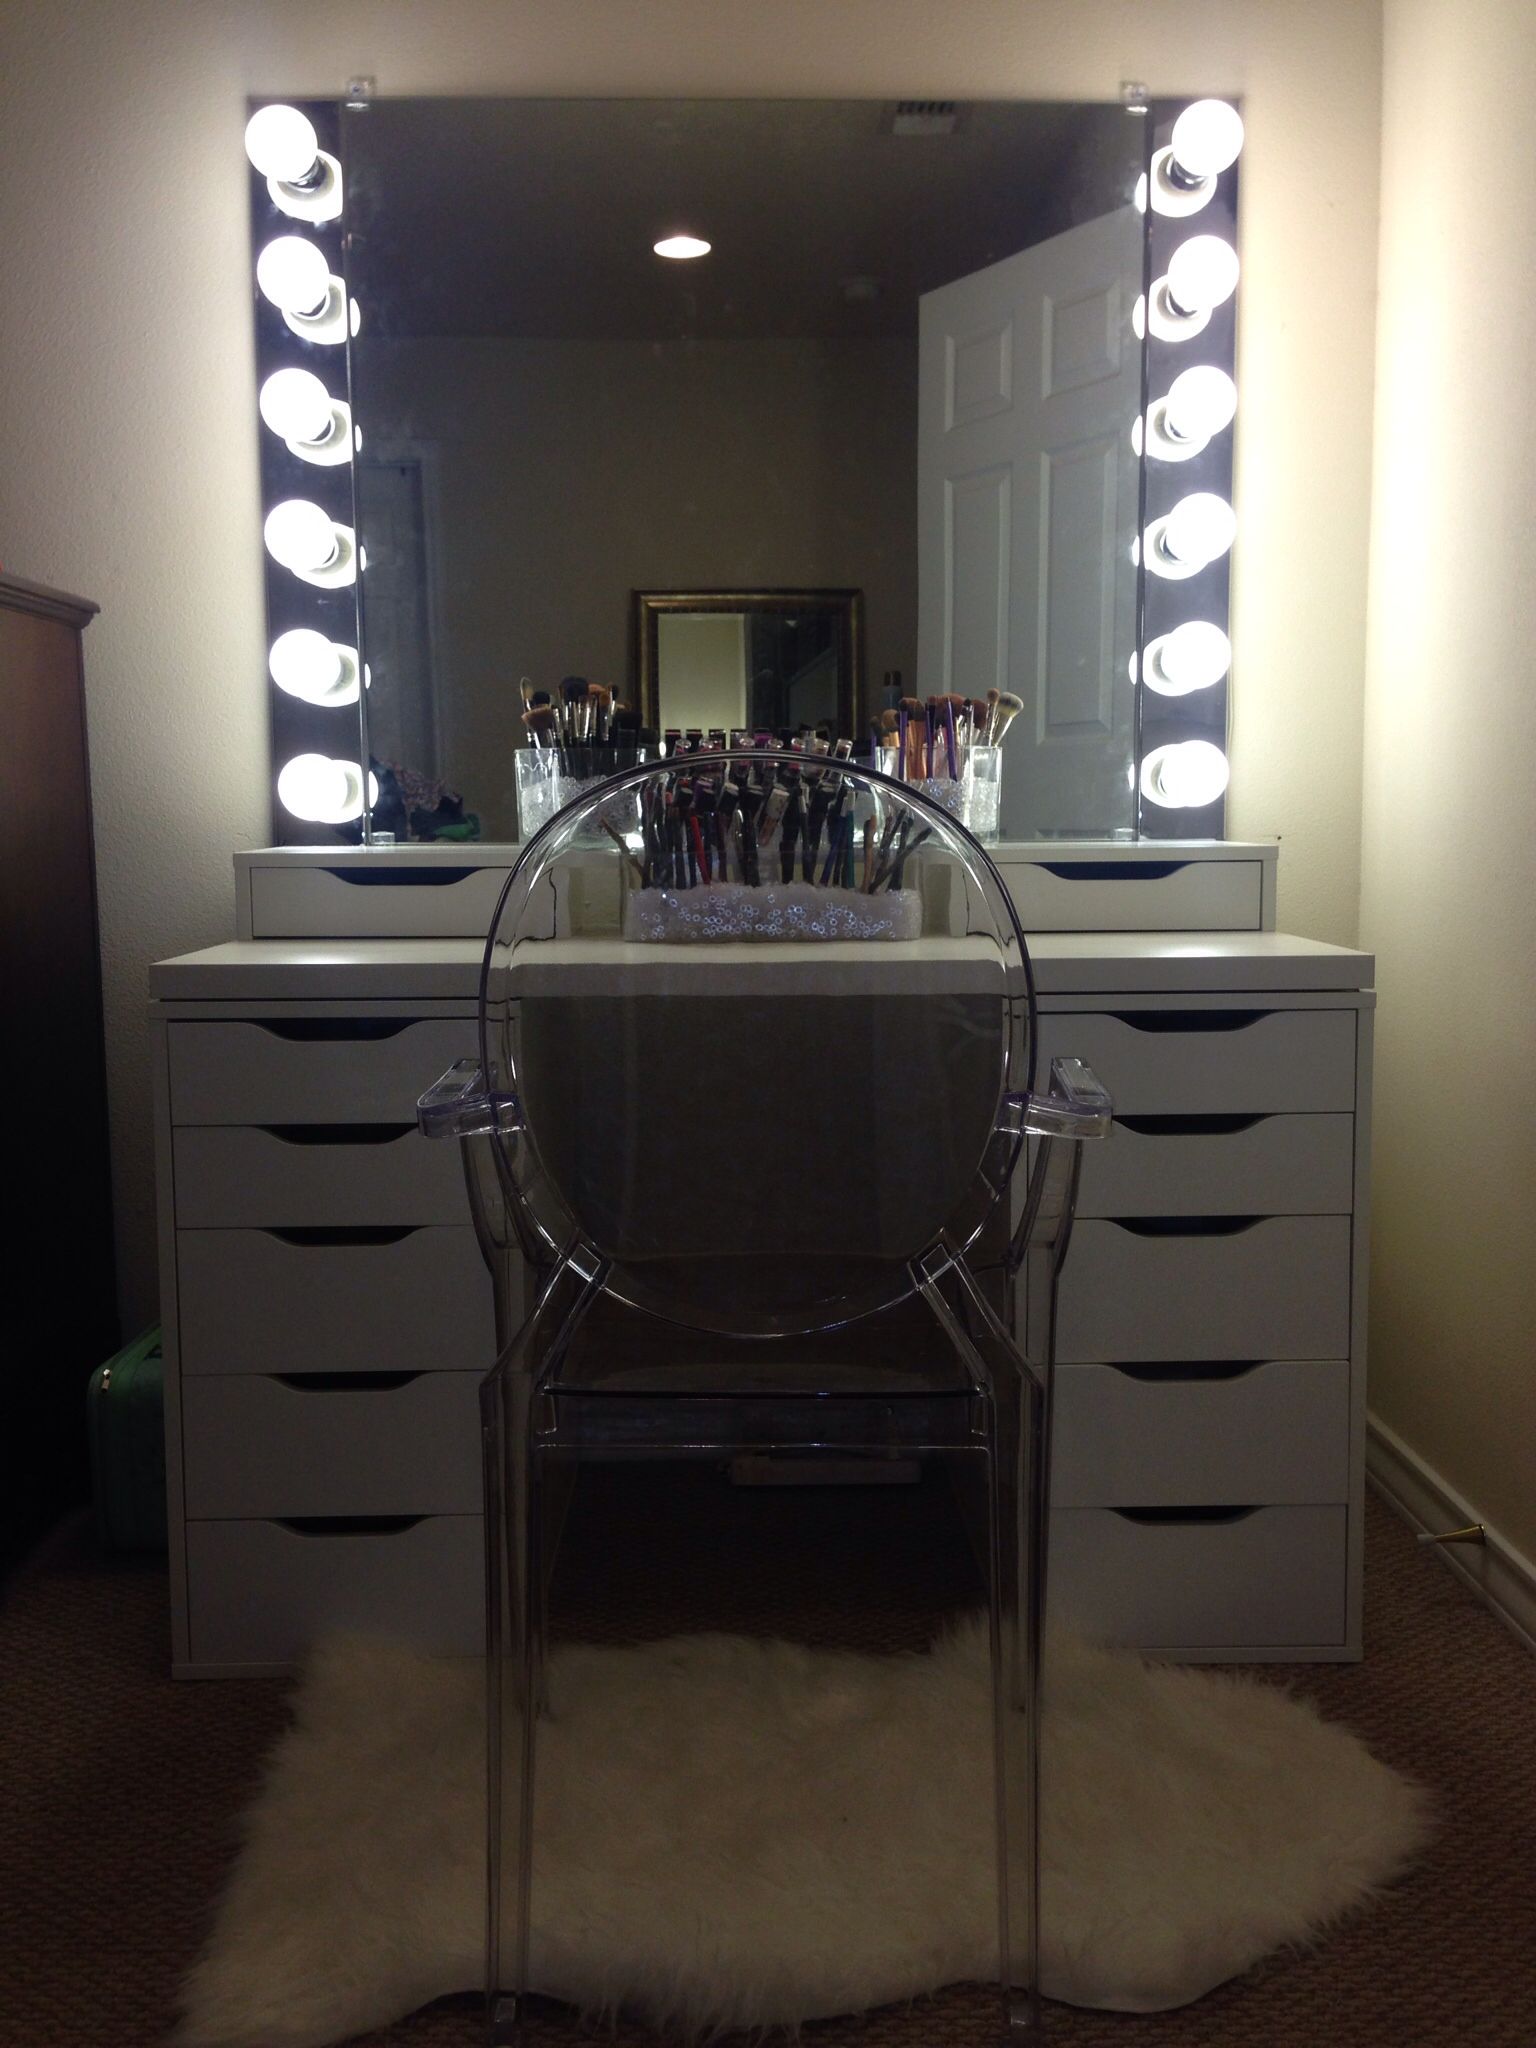 Hollywood Vanity Mirror with Lights, Makeup Vanity Mirror with Lights, Vanity  Mirror with Lights Ikea, Lighted Makeup Mirror, #Hollywood #Lights #Vanity